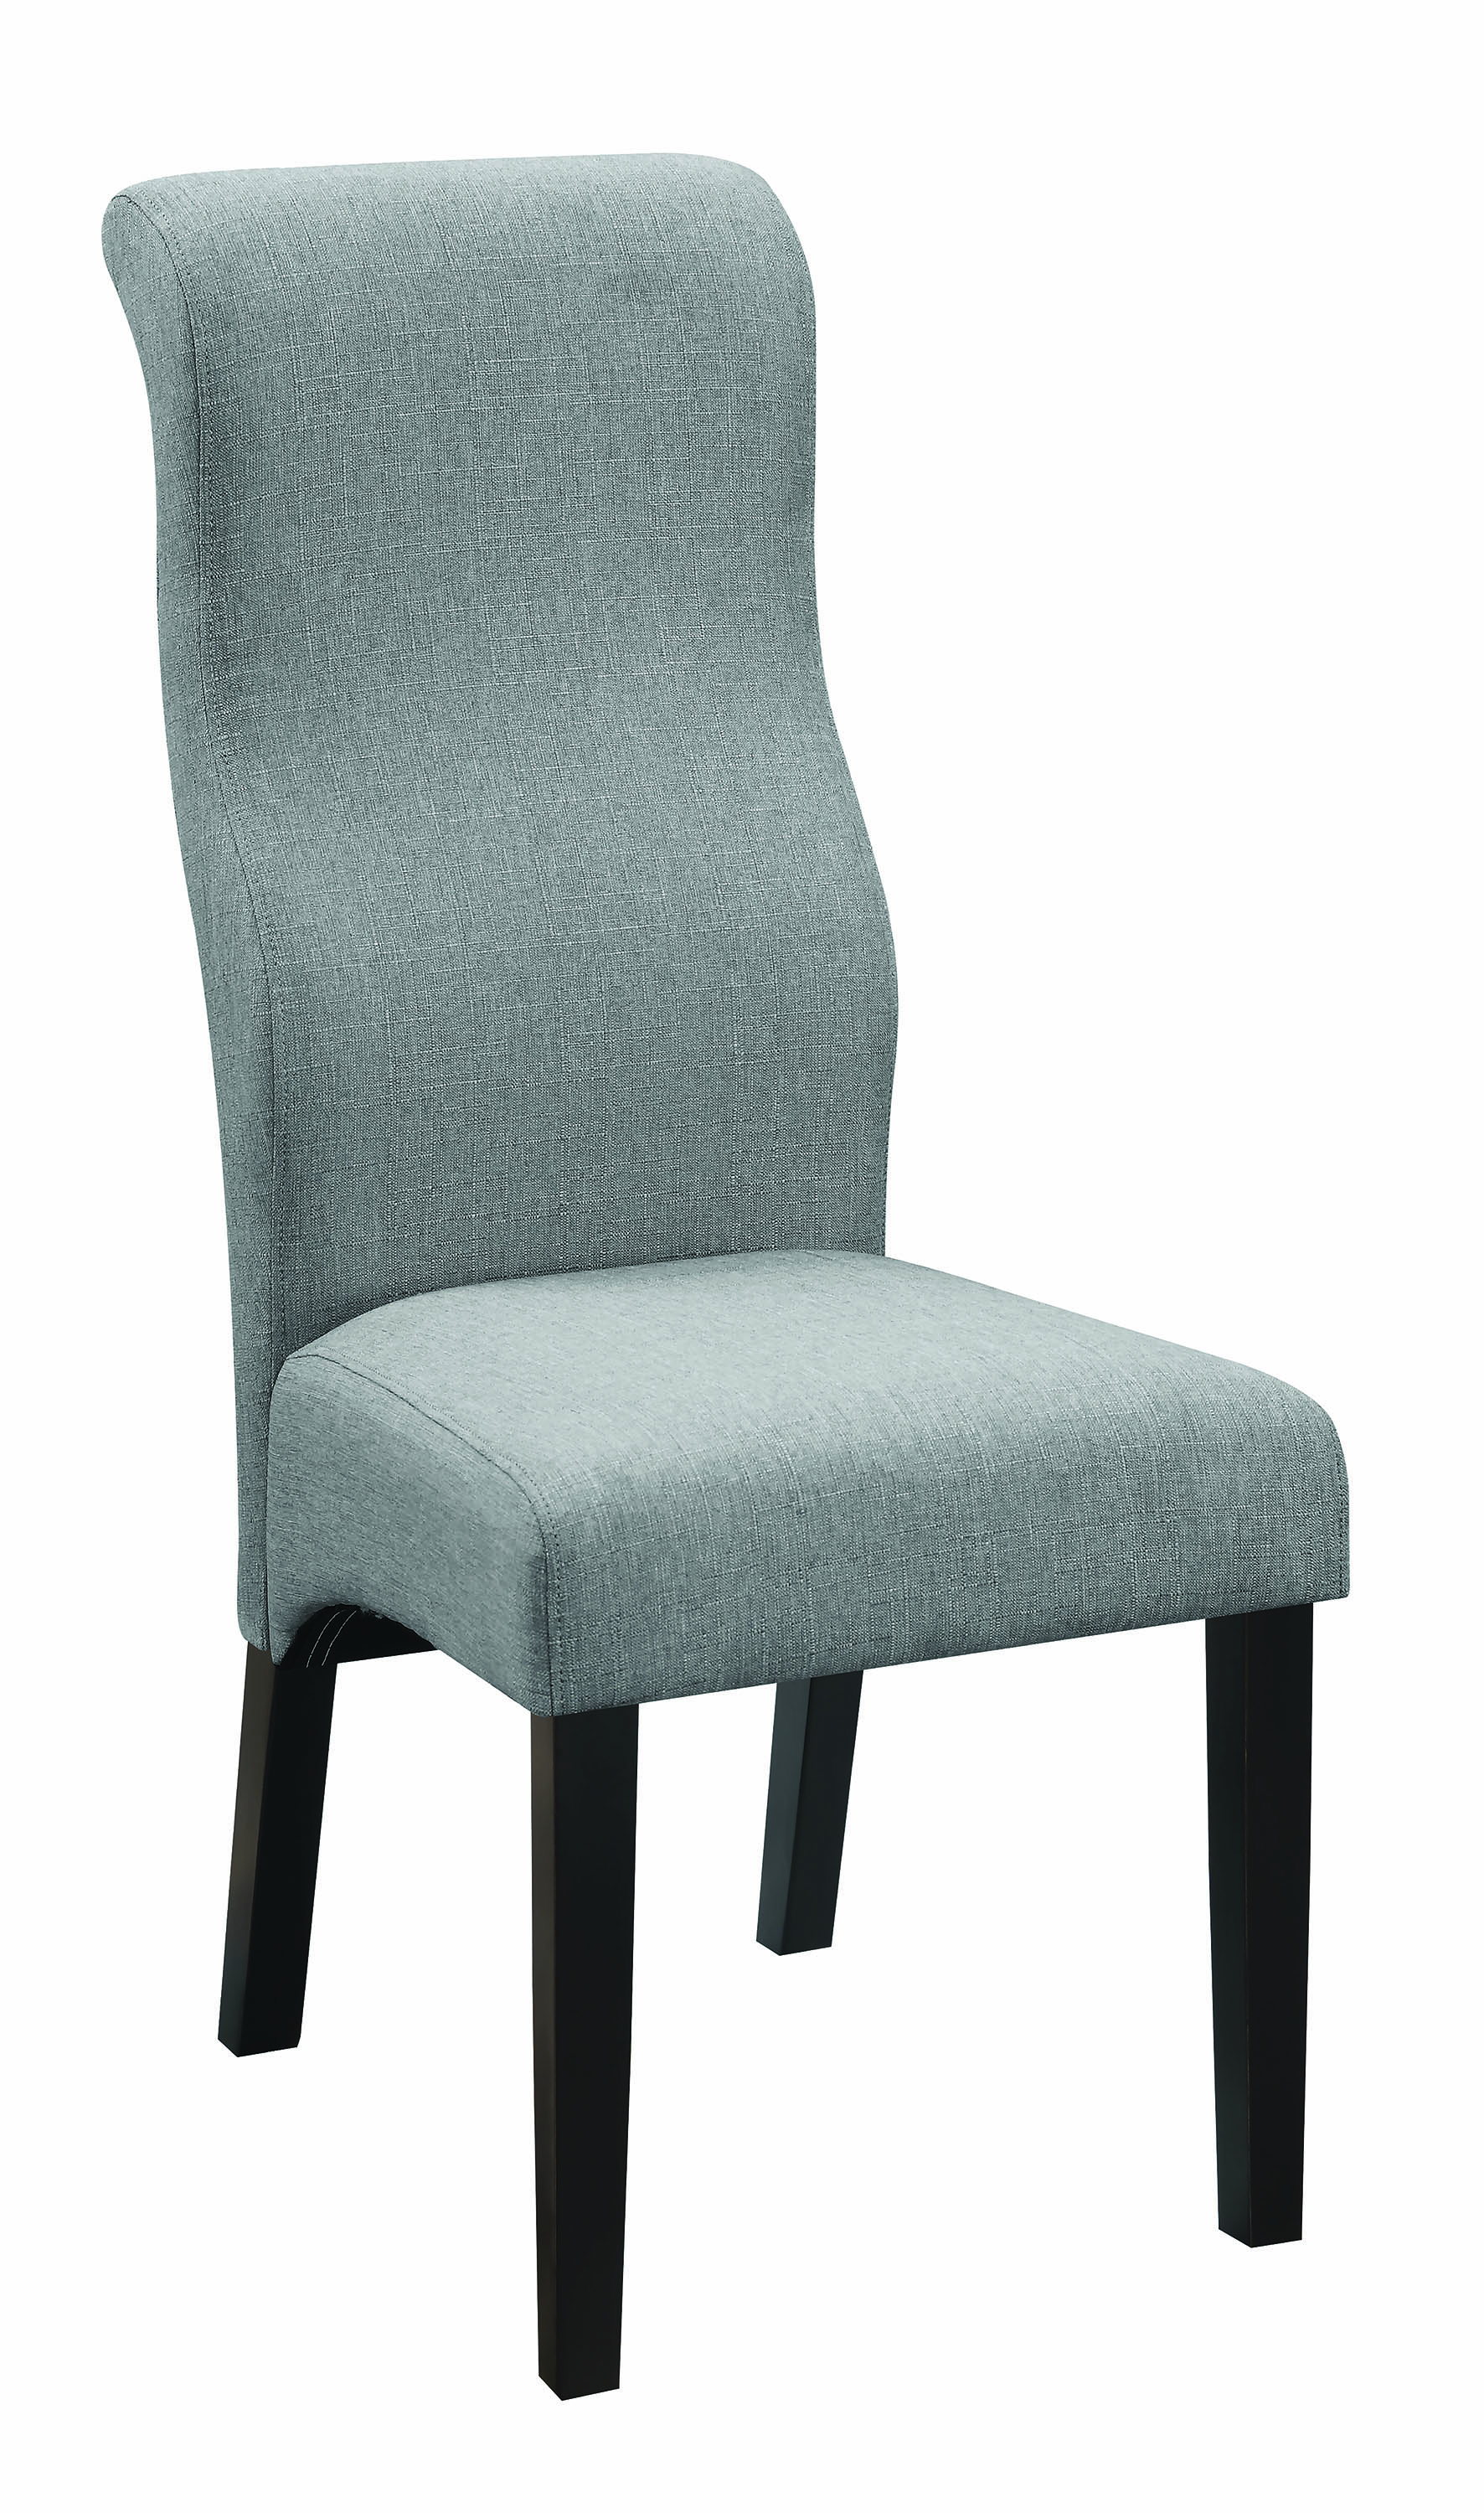 Coaster Contemporary Grey Dining Chair